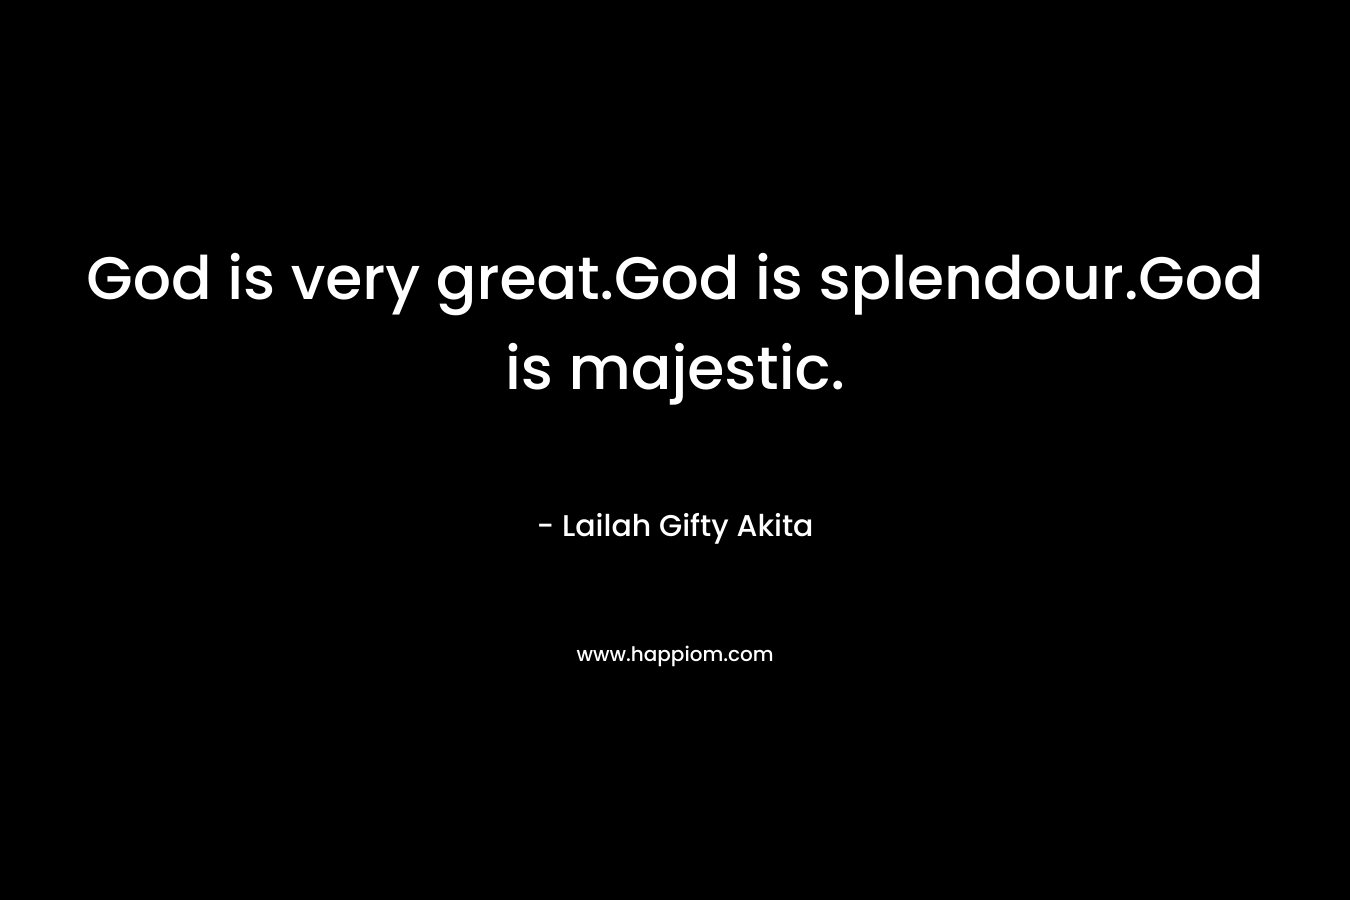 God is very great.God is splendour.God is majestic. – Lailah Gifty Akita